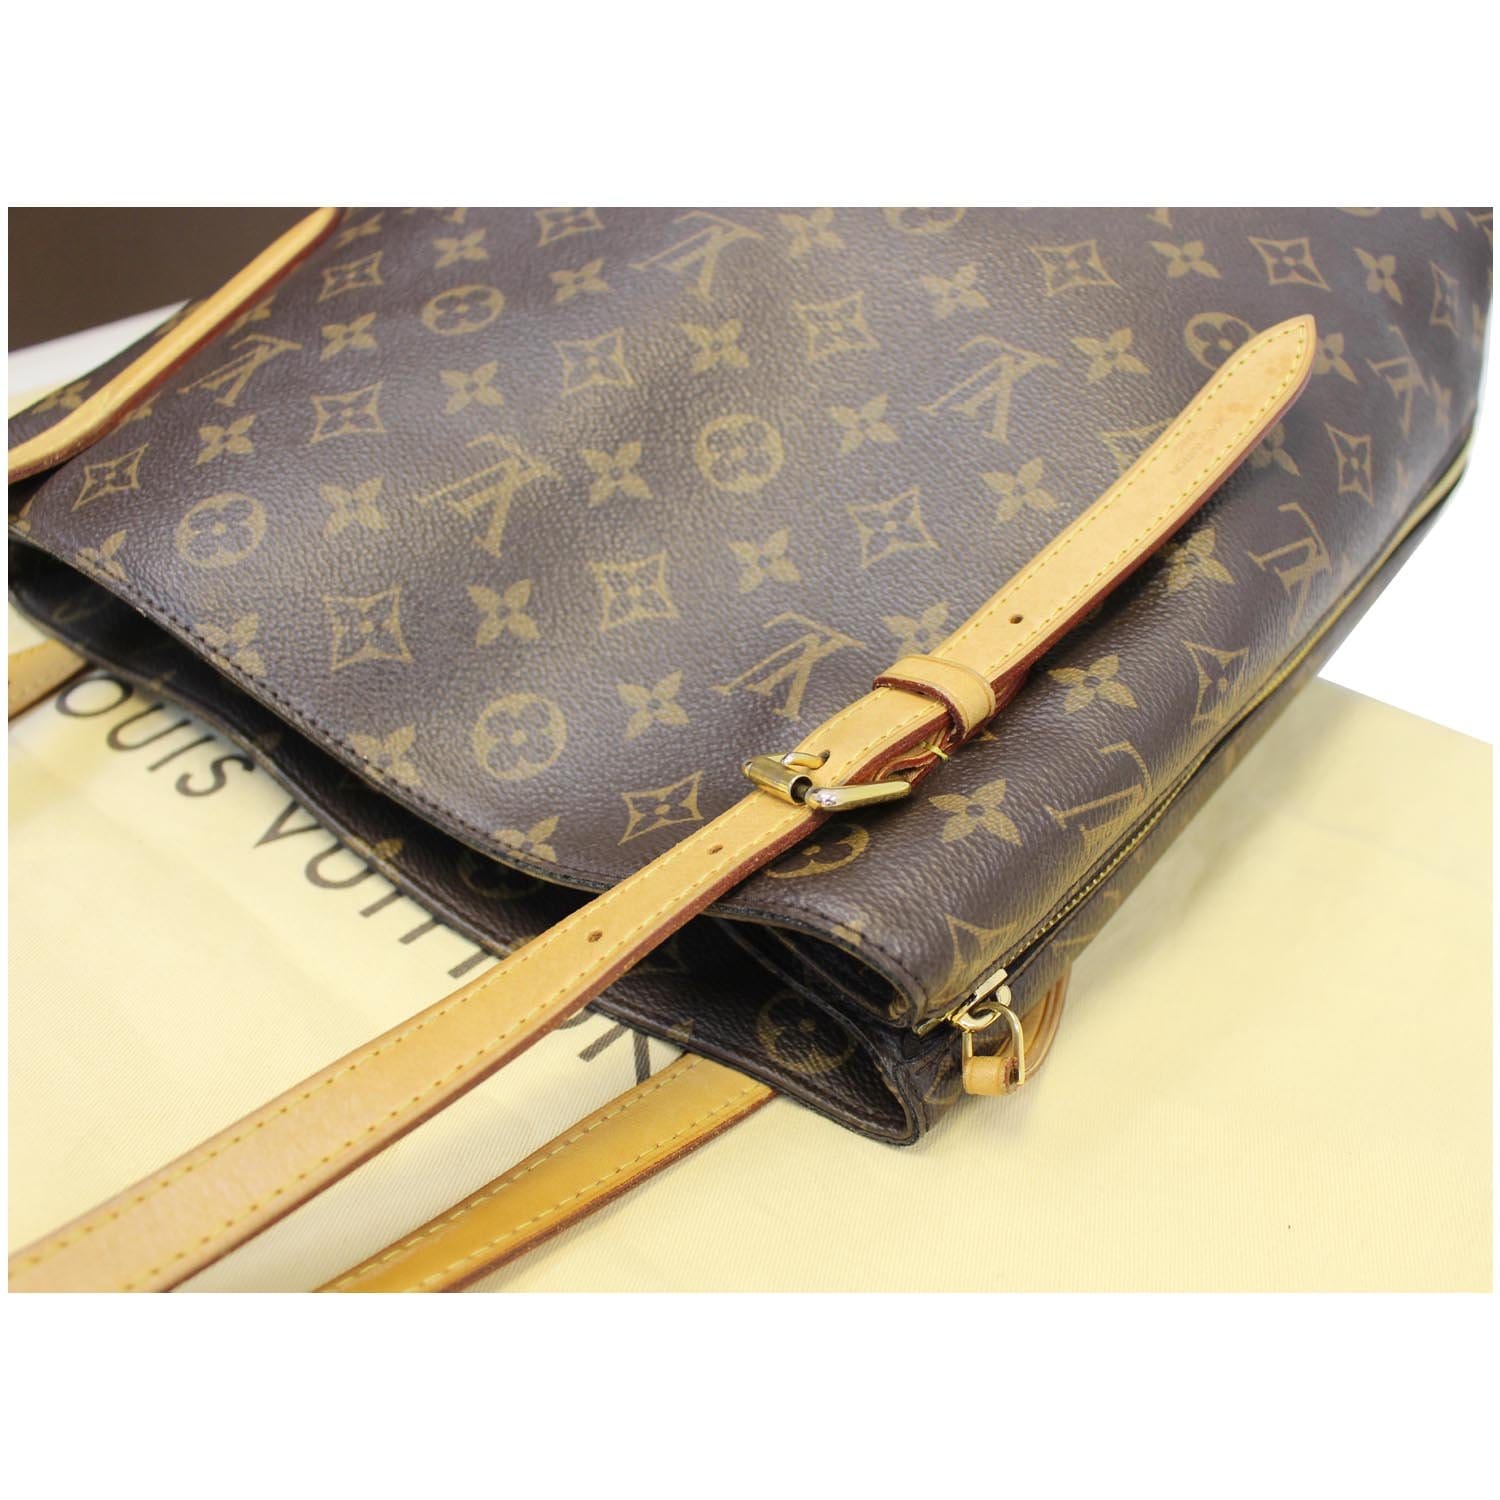 Voltaire leather handbag Louis Vuitton Brown in Leather - 28919915